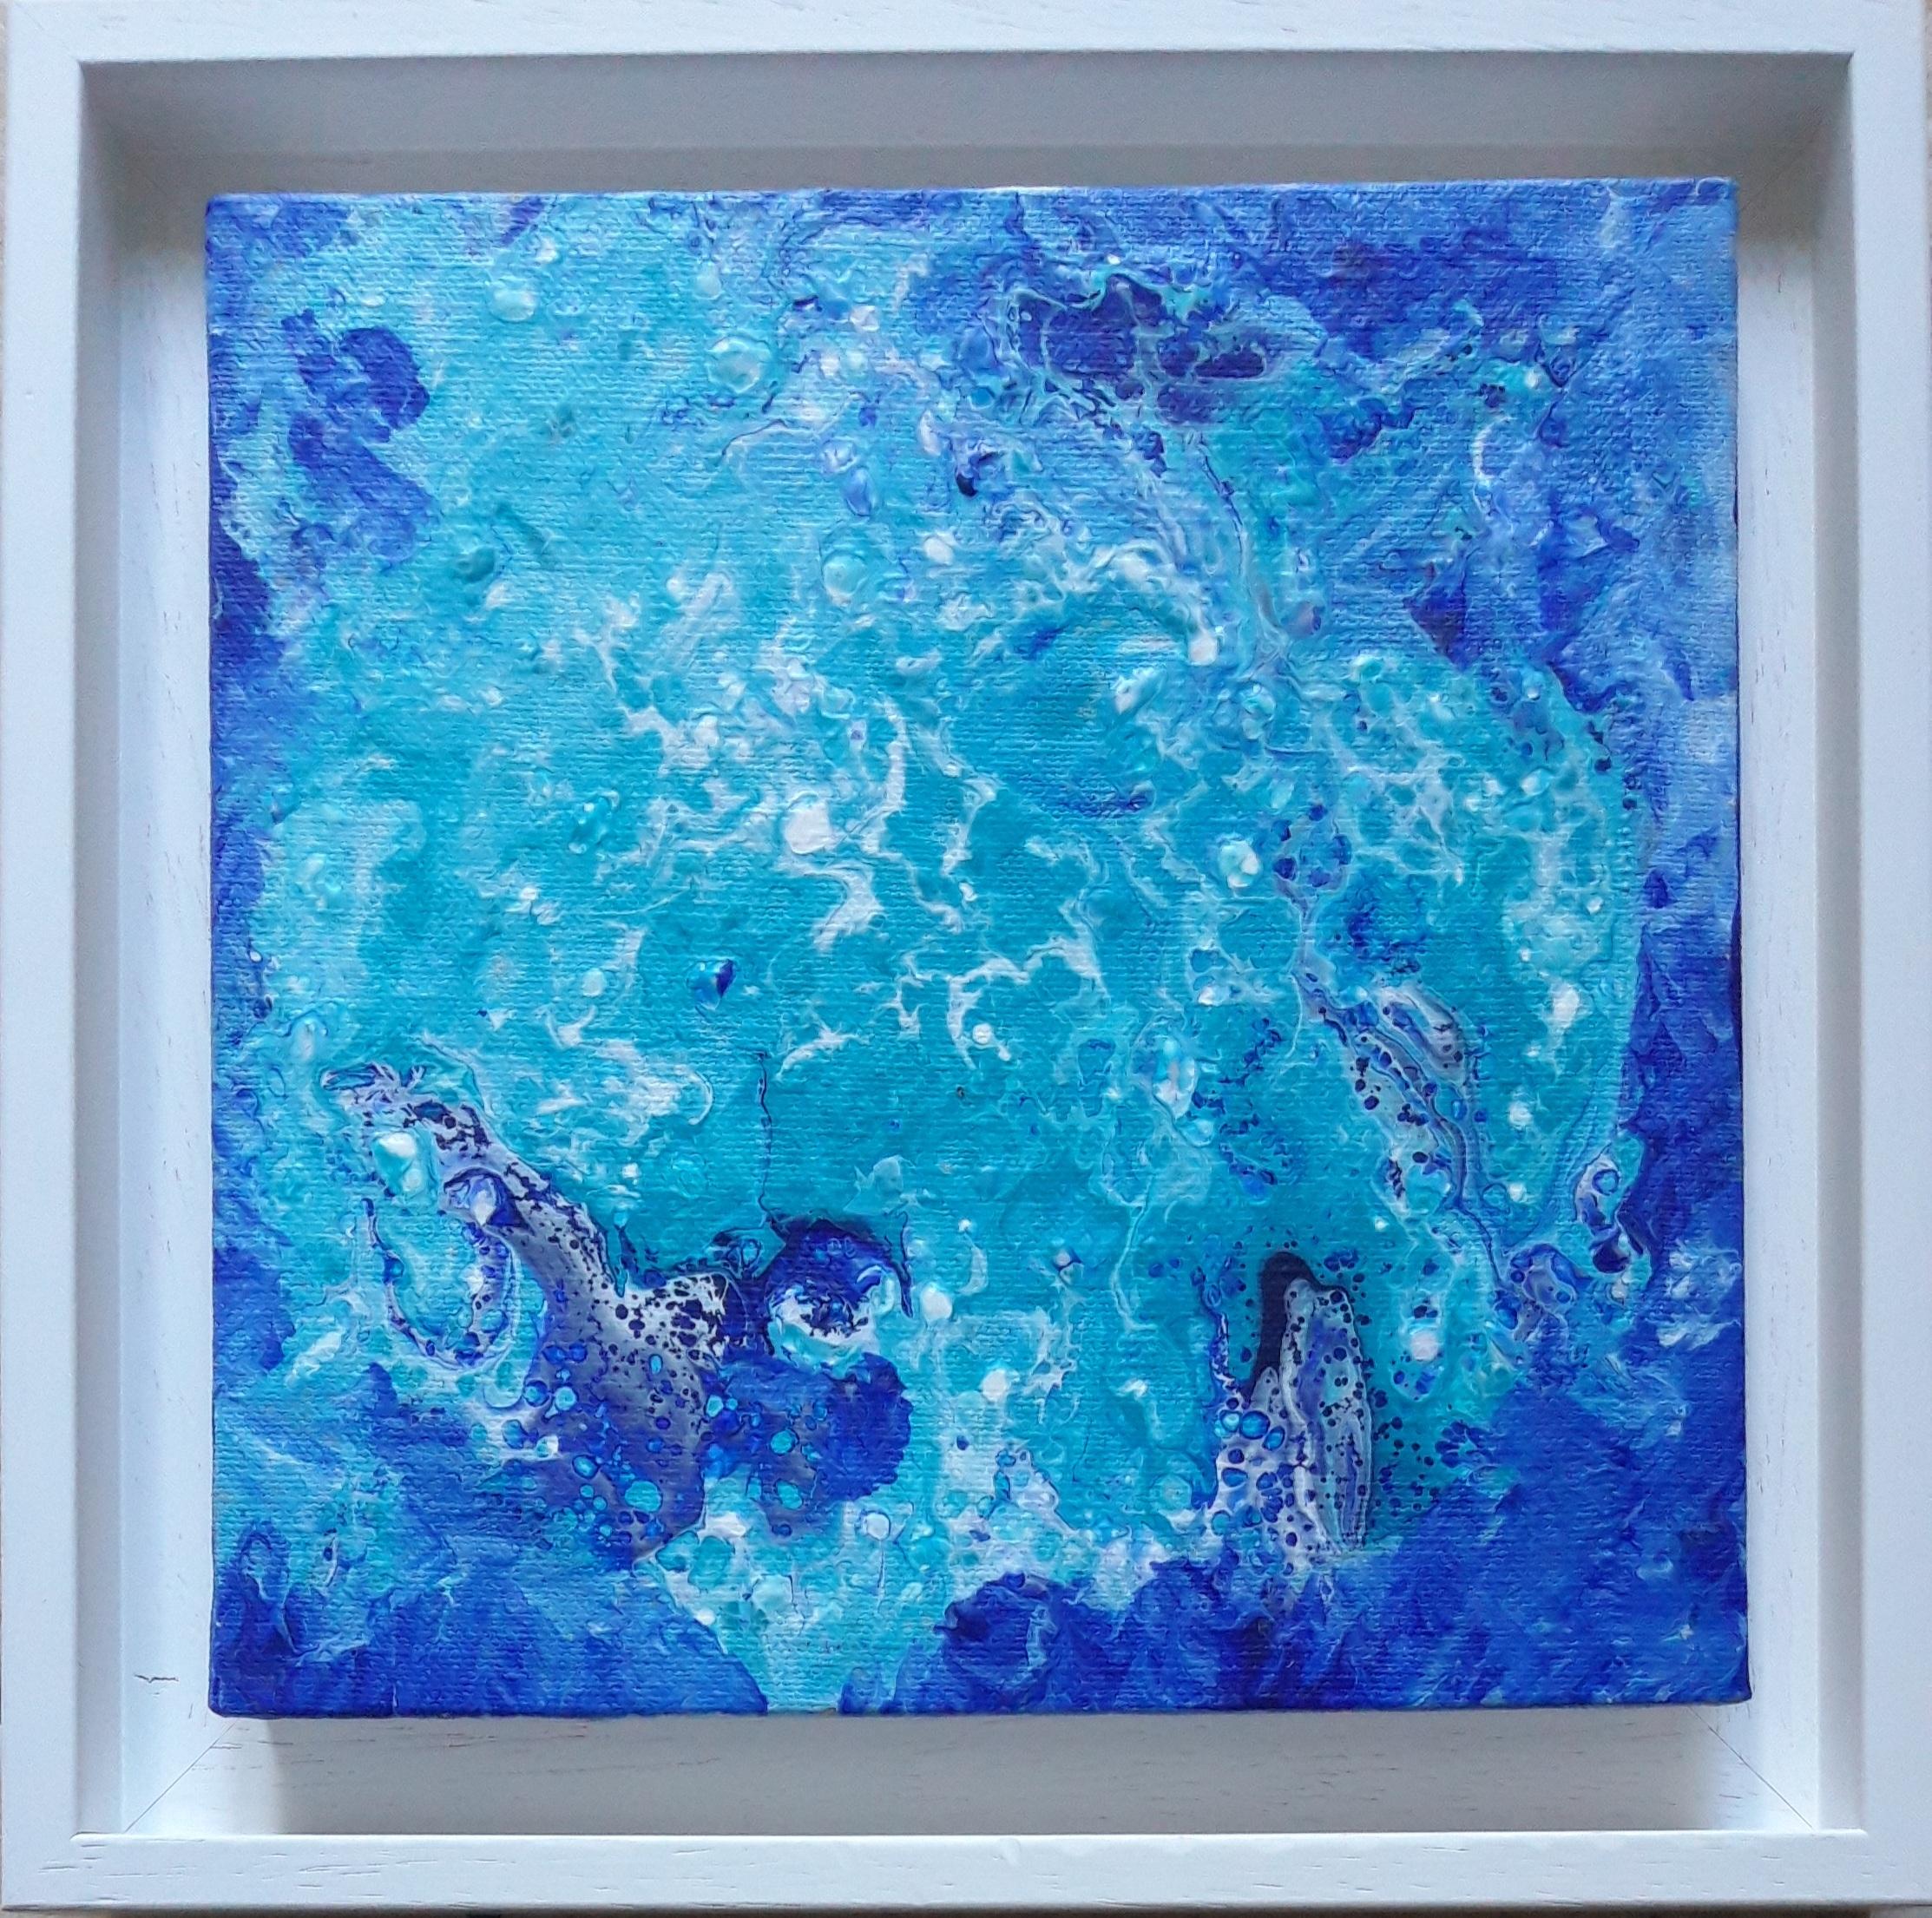 Artwork in acrylic on linen sold with a white frame